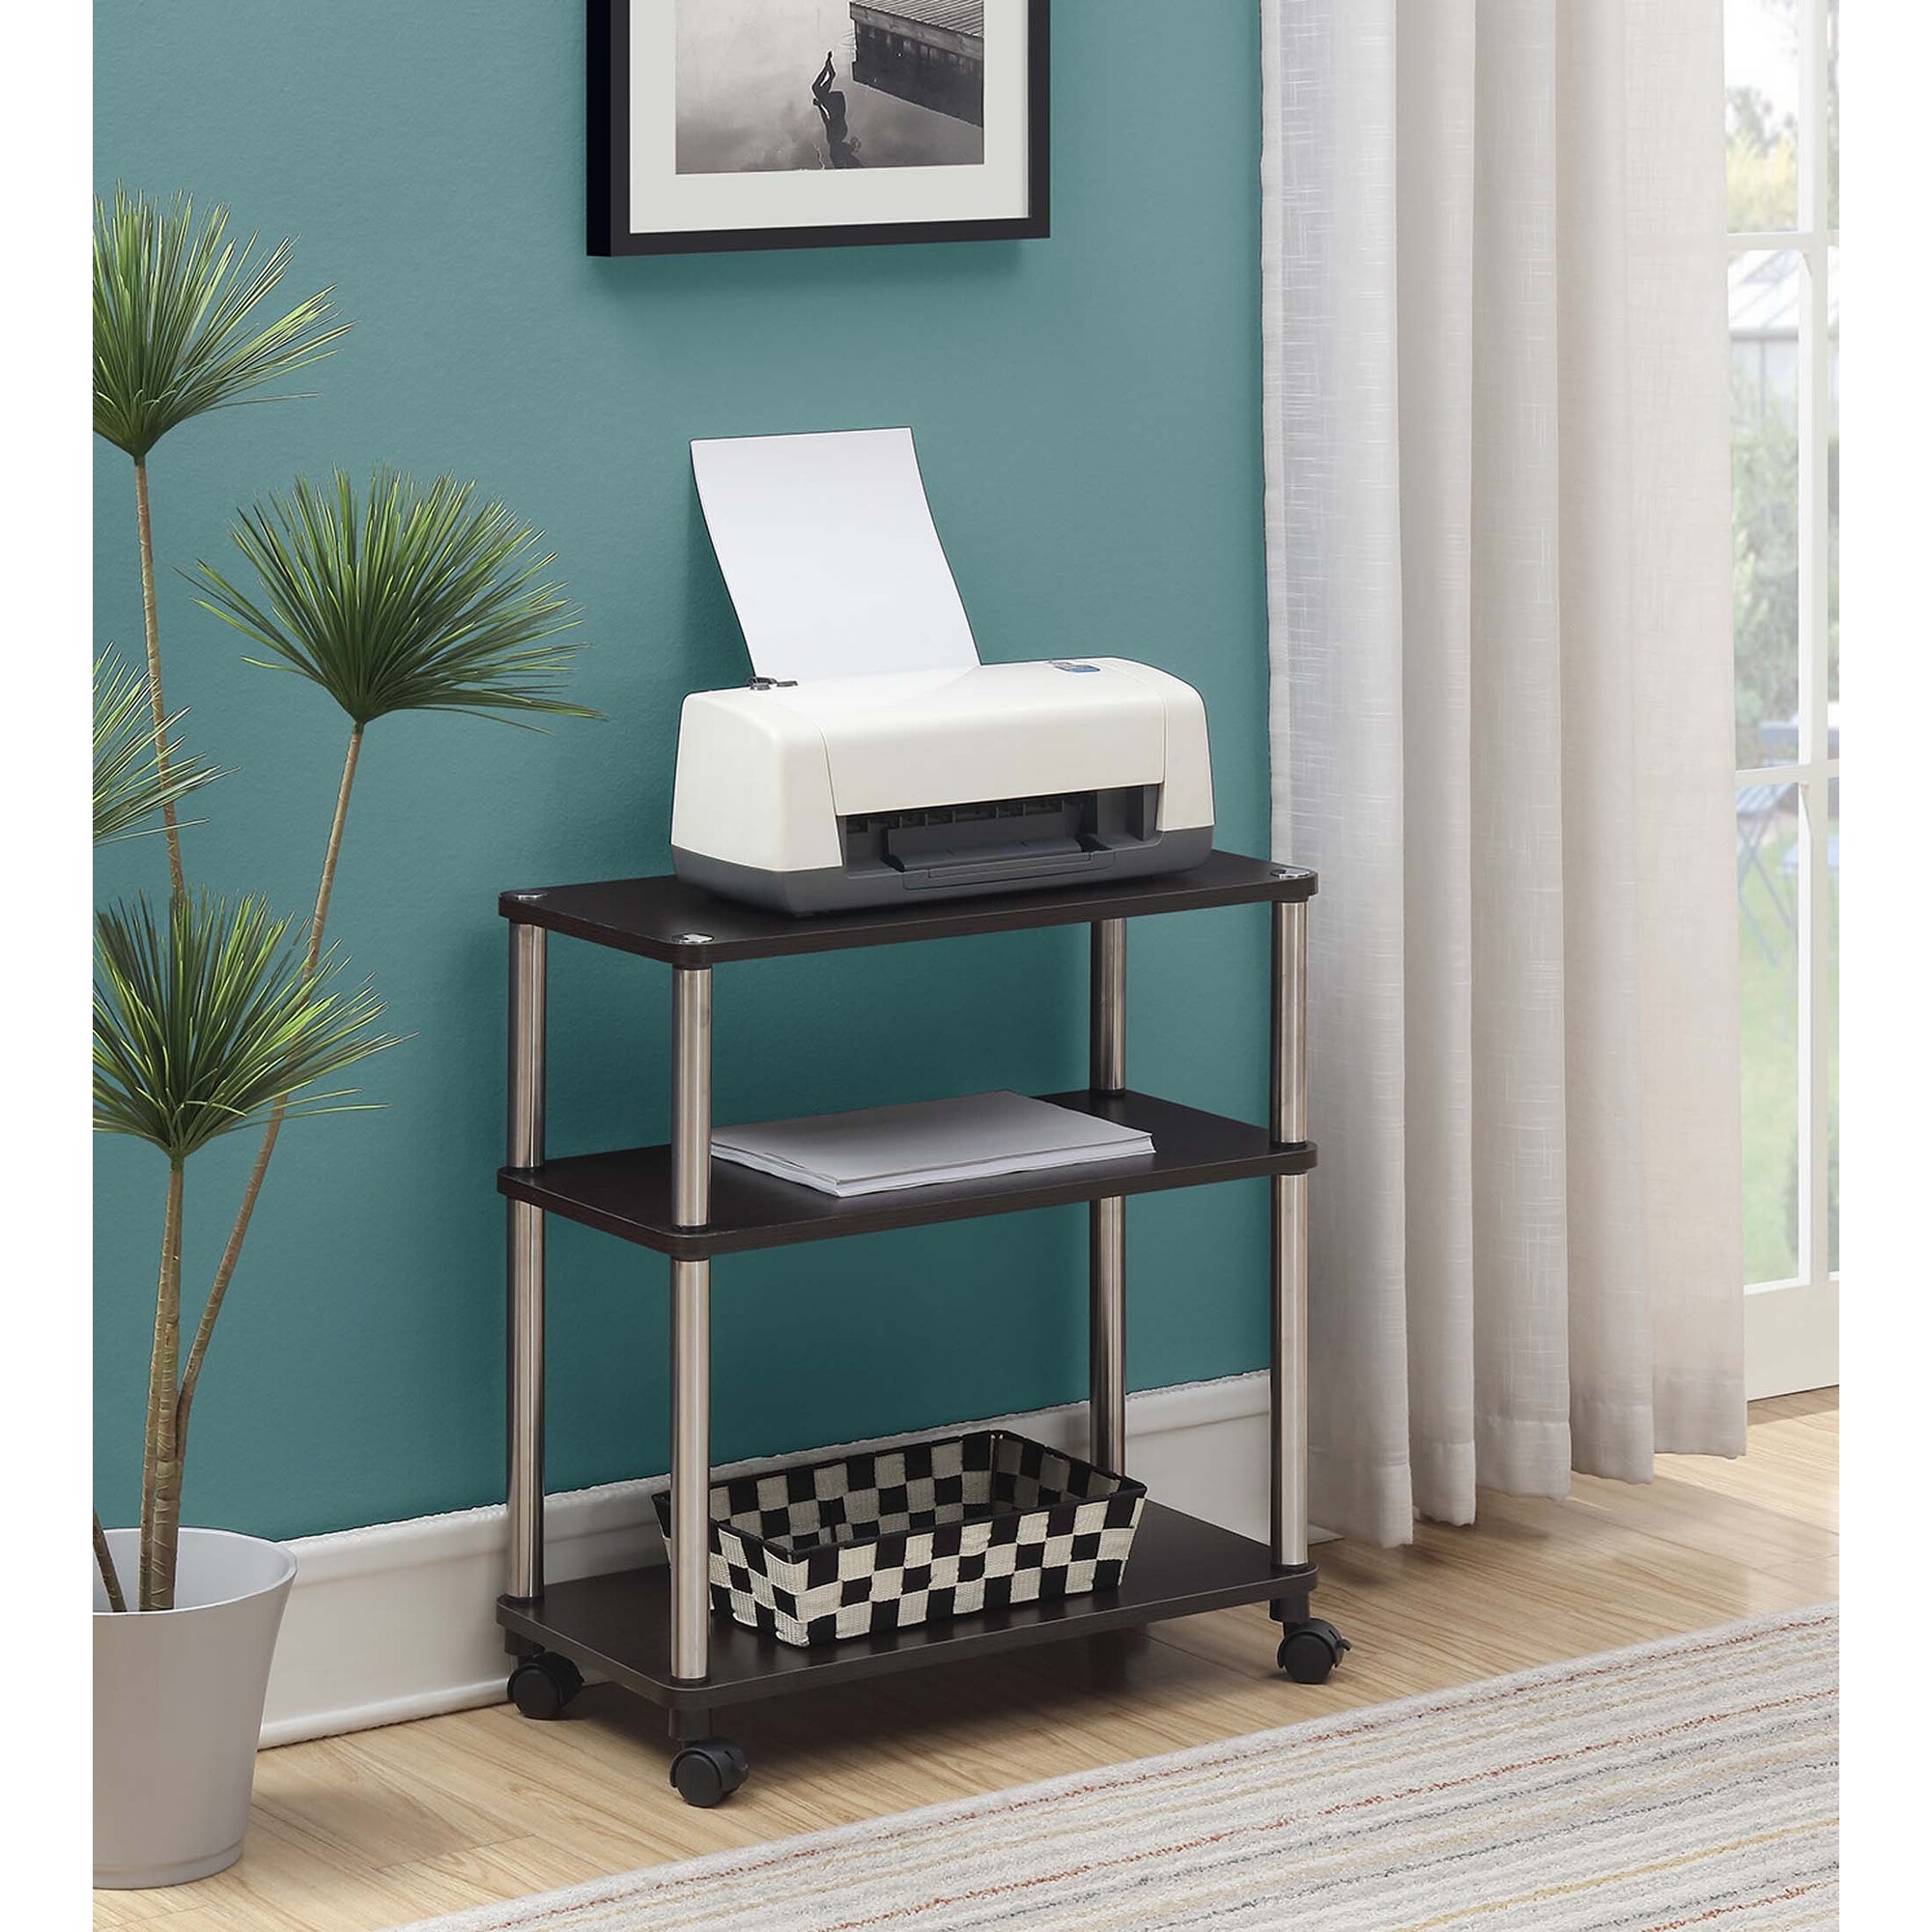 Designs2Go 3 Tier Office Caddy with Wheels Black - Breighton Home